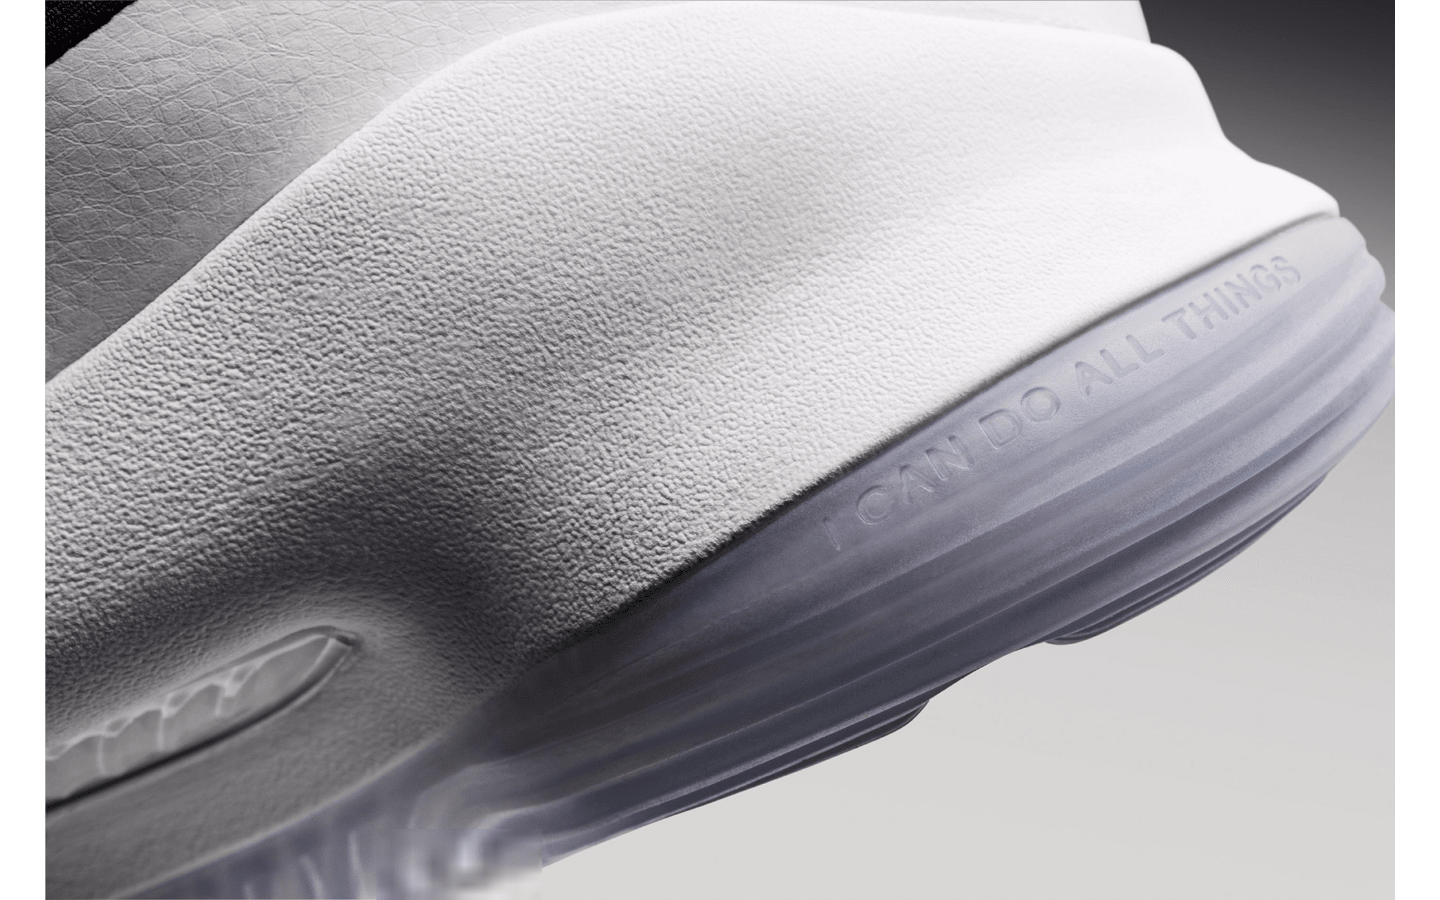 Under Armour Curry 4 Black/White 1298306-007 (Detail 2)